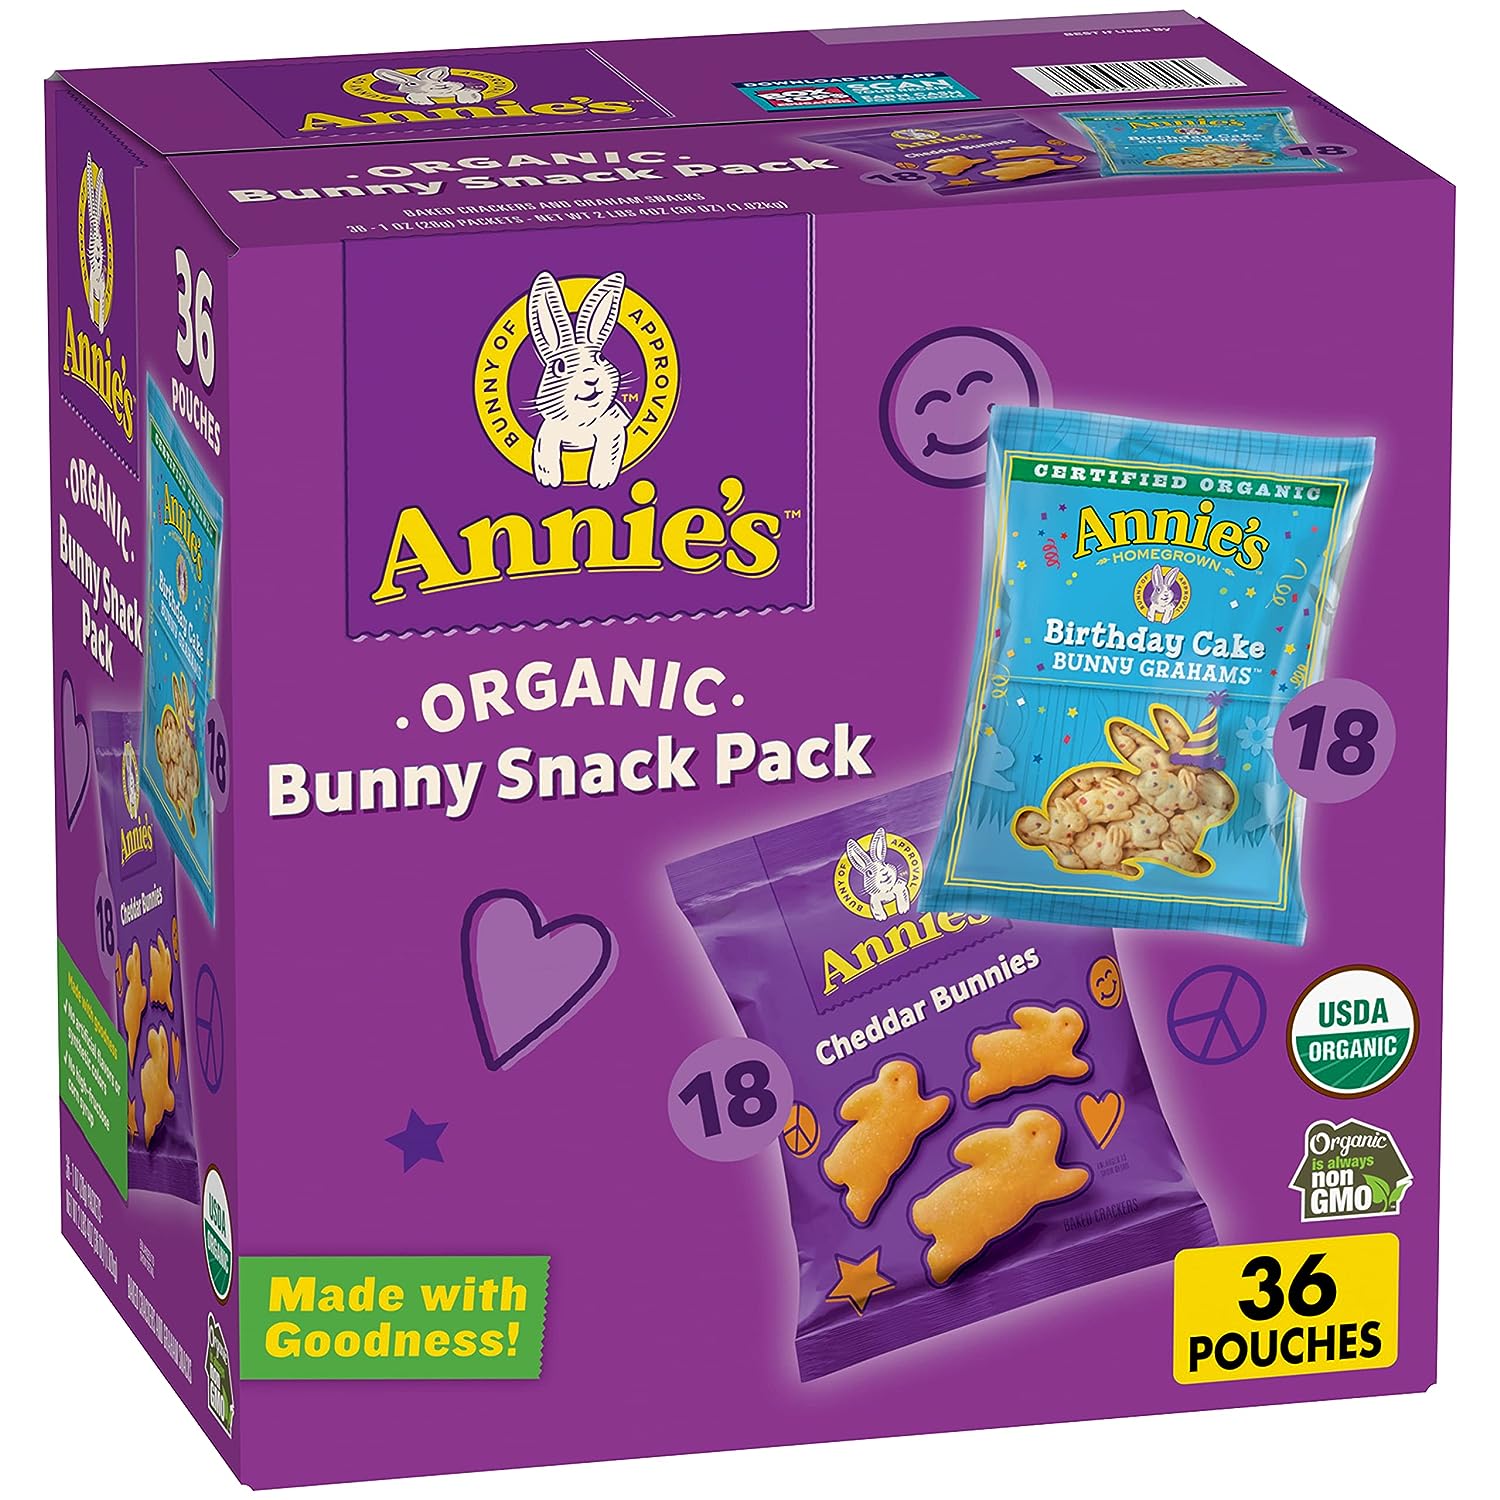 Annie’s Organic Birthday Cake Bunny Grahams and Cheddar Bunnies Snack Pack, 36 Count – Only $17.05!